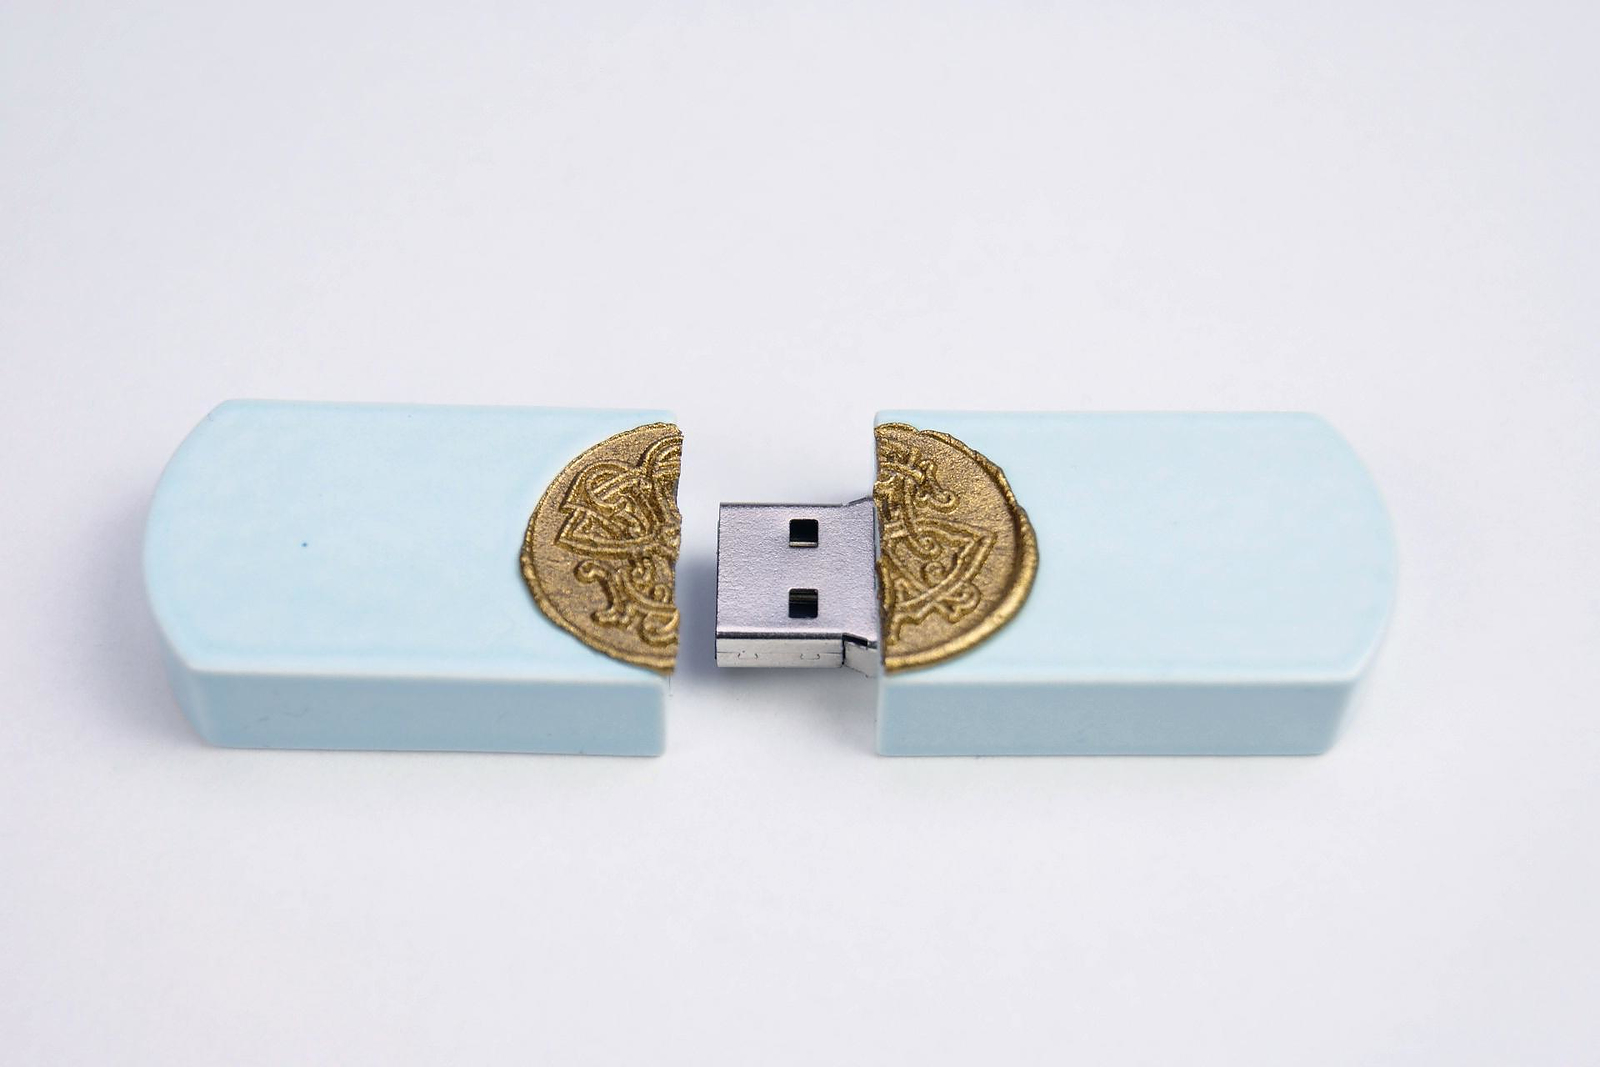 Top Secret USB Stick will store your Secrets in Style.